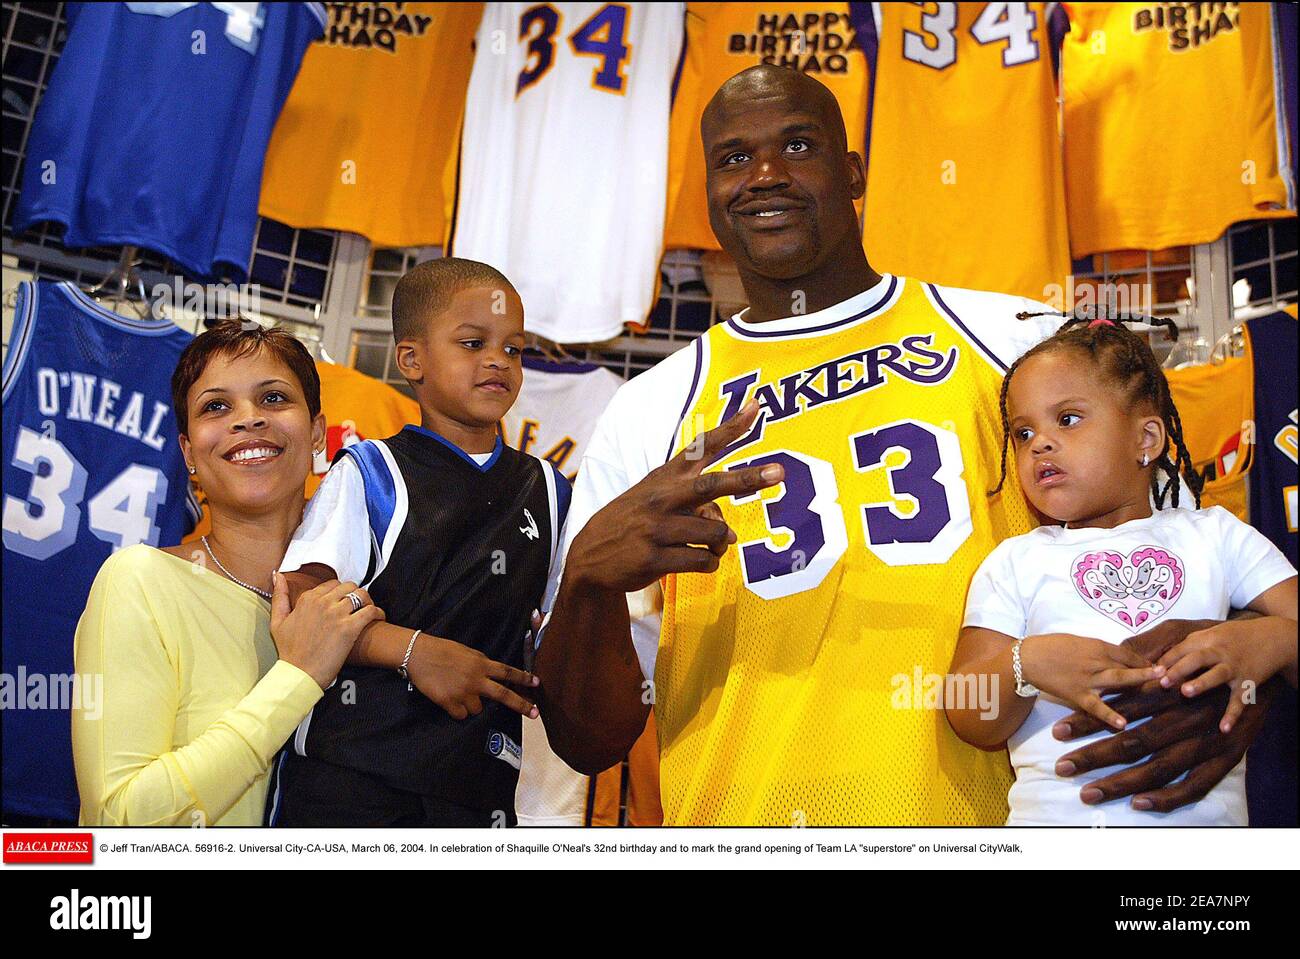 © Jeff Tran/ABACA. 56916-2. Universal City-CA-USA, March 06, 2004. In celebration of Shaquille O'Neal's 32nd birthday and to mark the grand opening of Team LA superstore on Universal CityWalk, Shaquille unveils a 40 feet tall neon sign in his likeness sporting his famous number 34 Lakers Jersey. However, Shaquille attends the event wearing a Lakers Jersey number 33 which was once worn by a retired Lakers player, Kareem Abdul-Jabar. Stock Photo